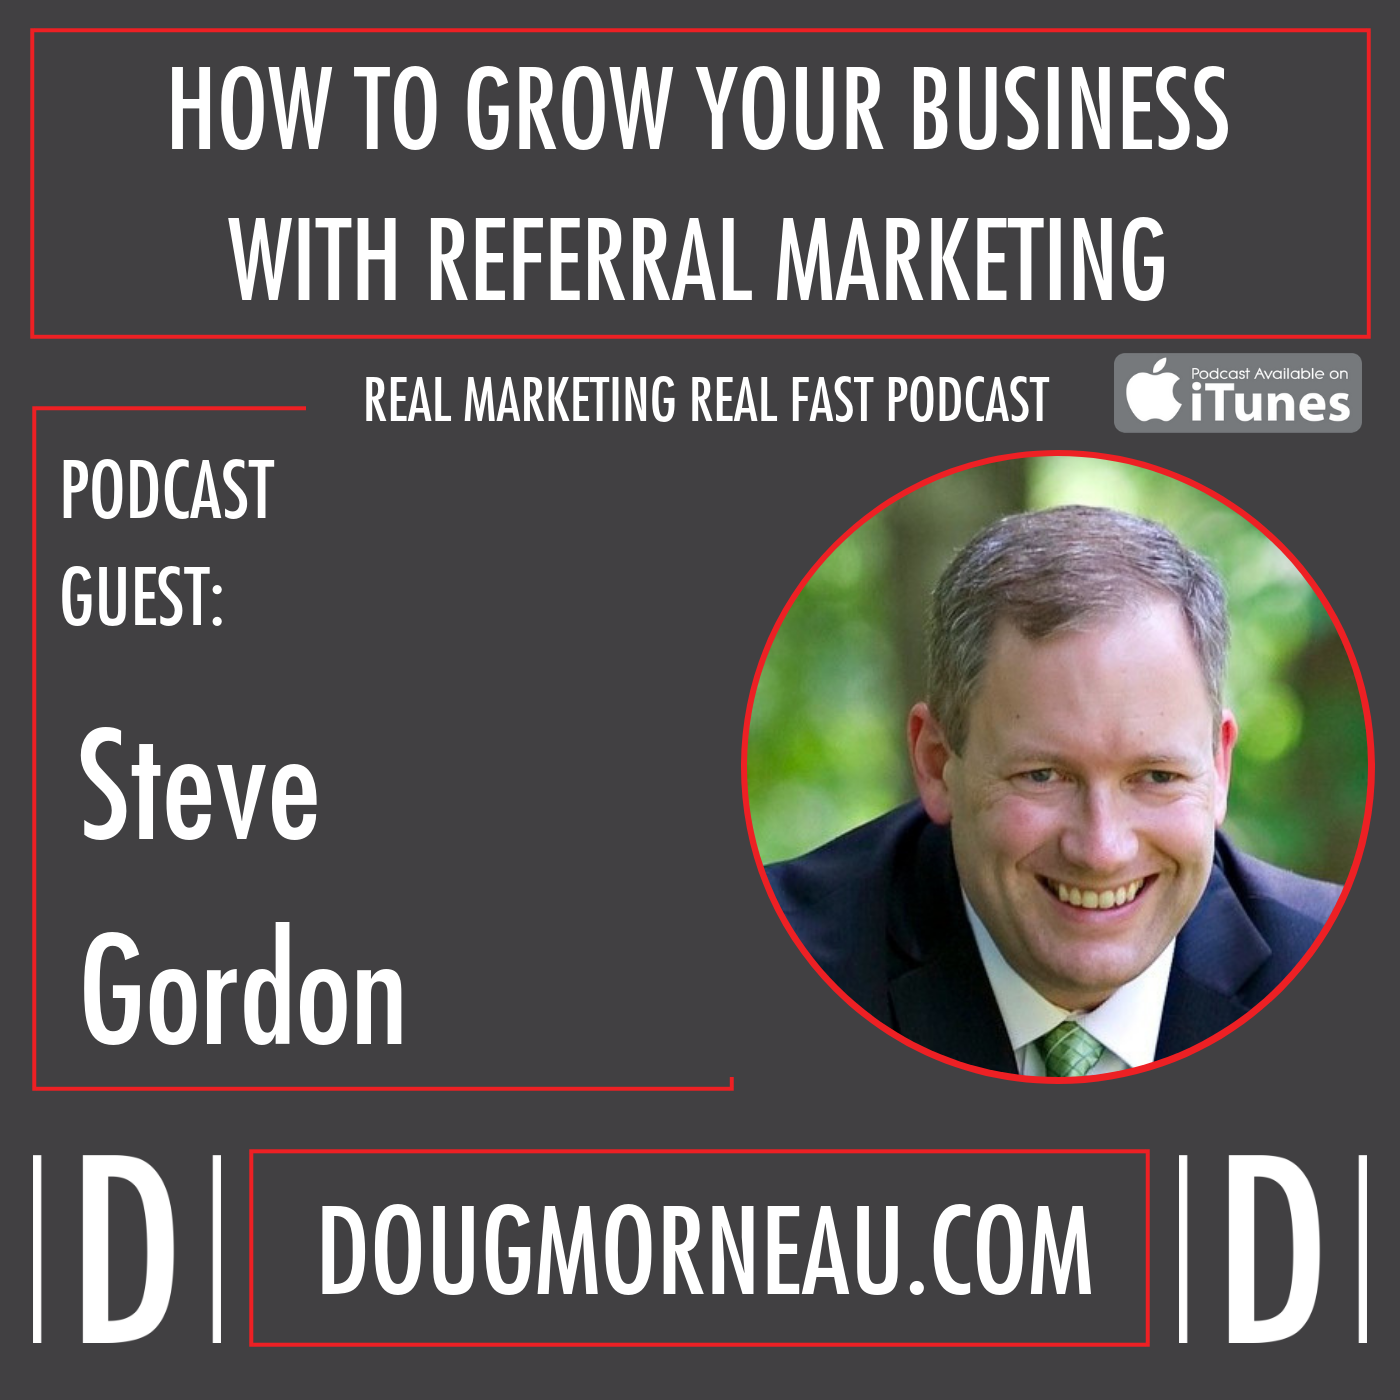 HOW TO GROW YOUR BUSINESS WITH REFERRAL MARKETING Steve Gordon DOUG MORNEAU - REAL MARKETING REAL FAST PODCAST